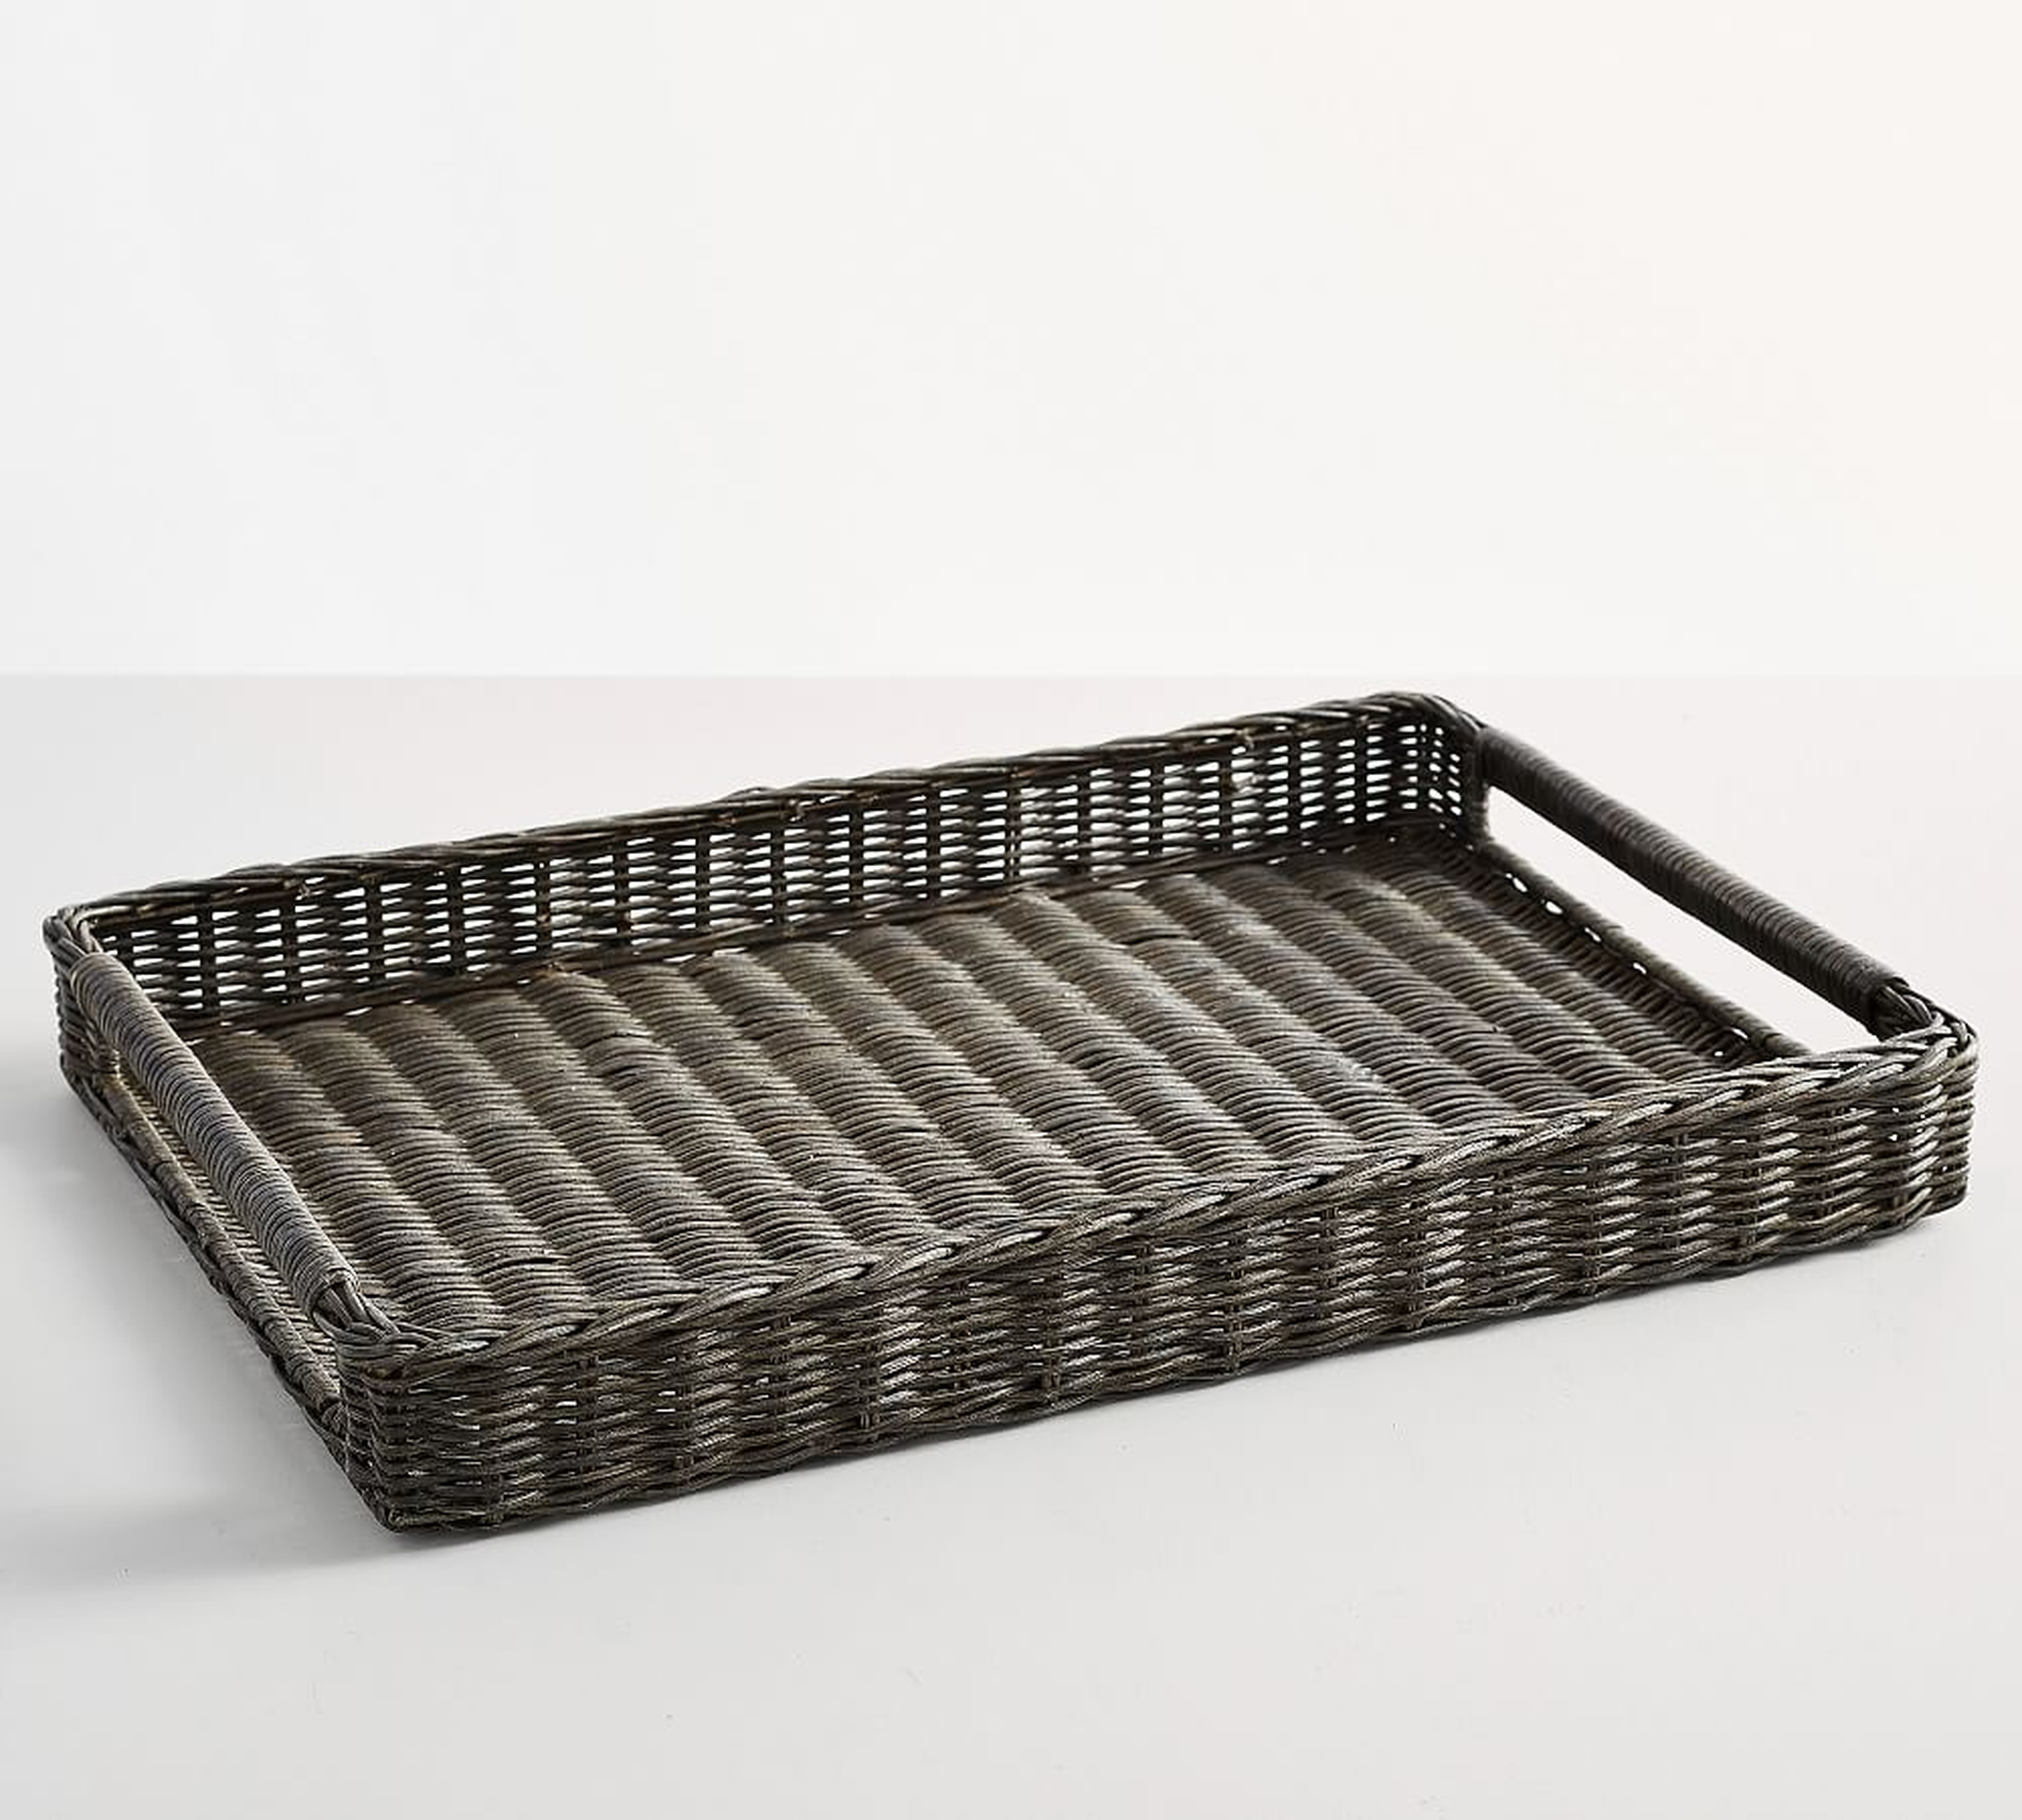 Handwoven Rectangluar Tray with Handles, Dark Natural, 24"W - Pottery Barn